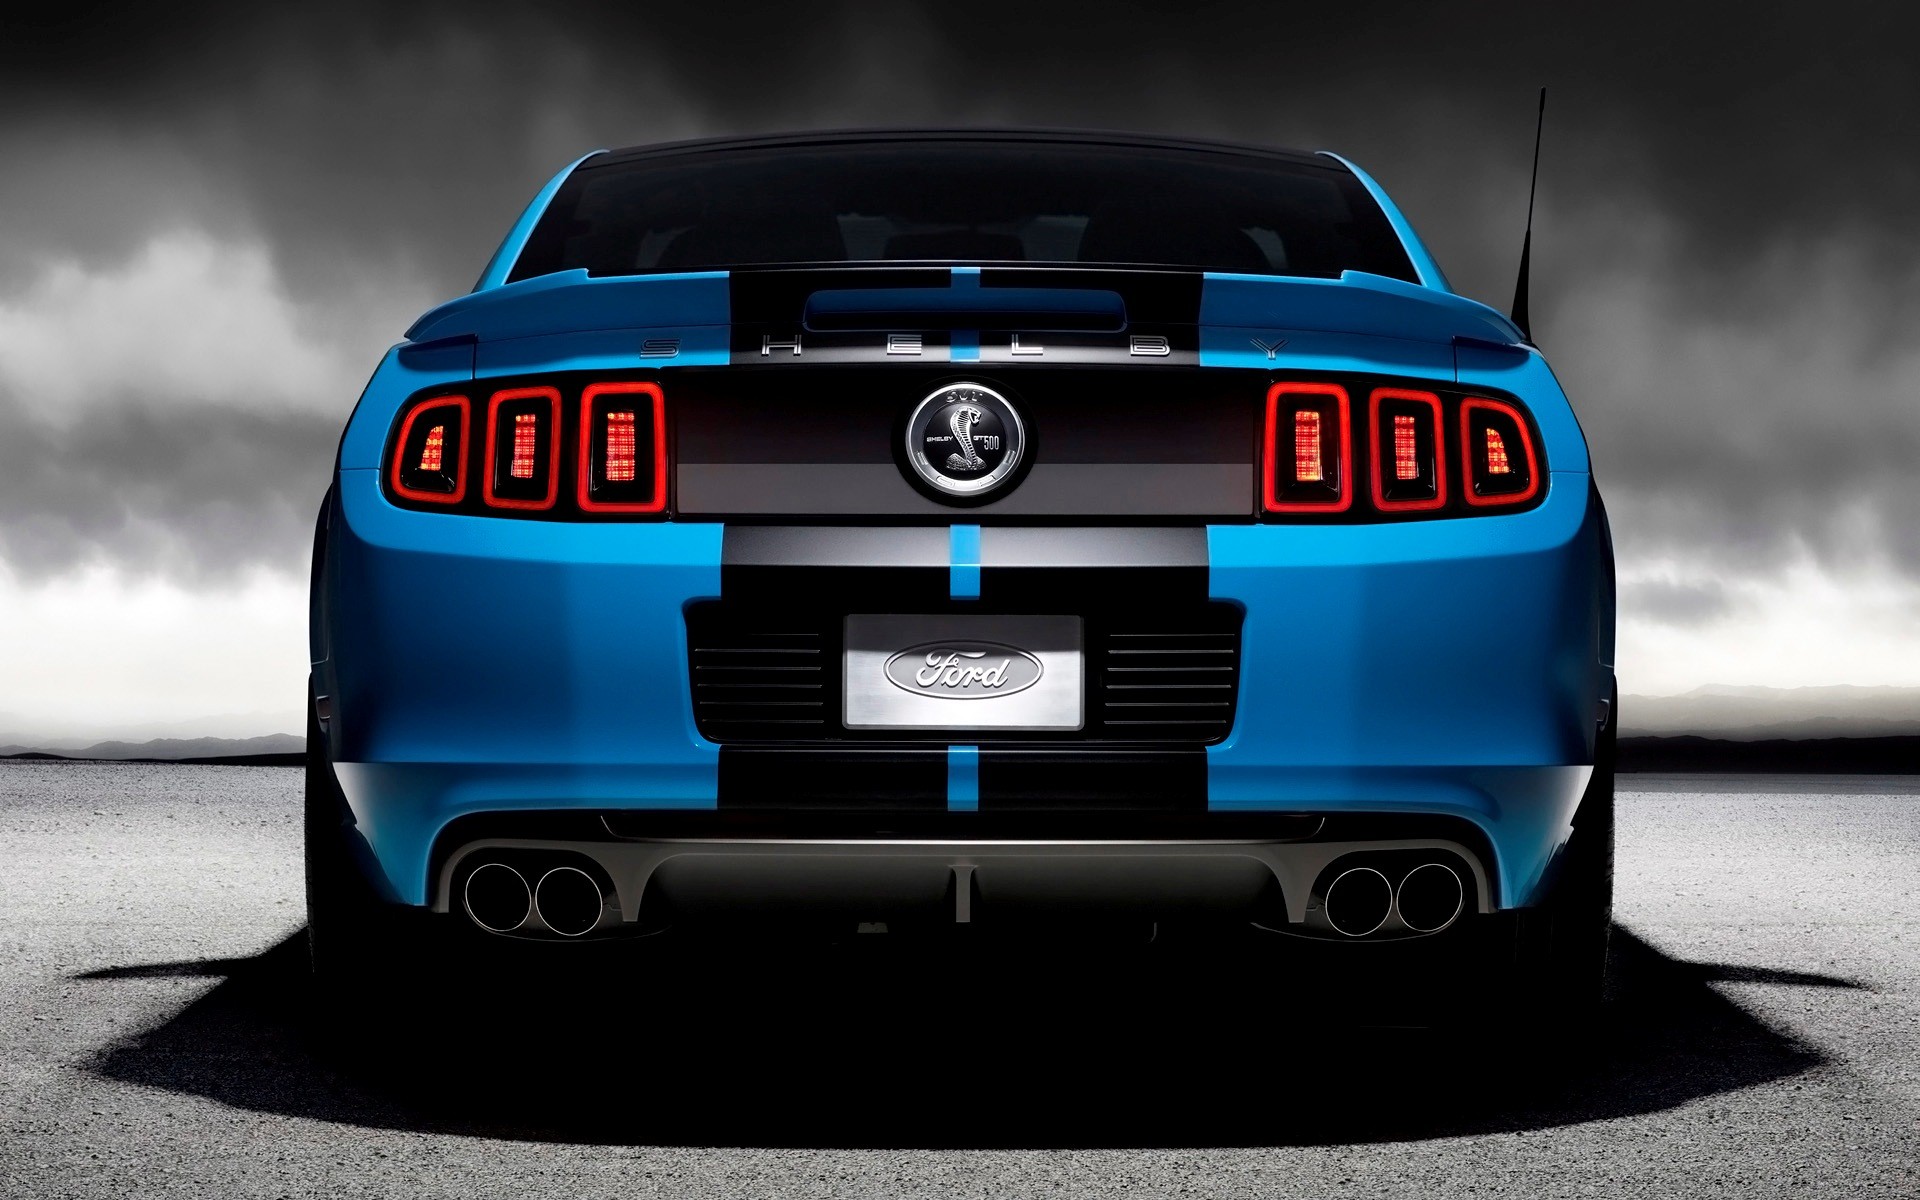 General 1920x1200 Shelby Ford Mustang Shelby blue cars vehicle Ford car Ford Mustang S-197 II Ford Mustang racing stripes muscle cars American cars